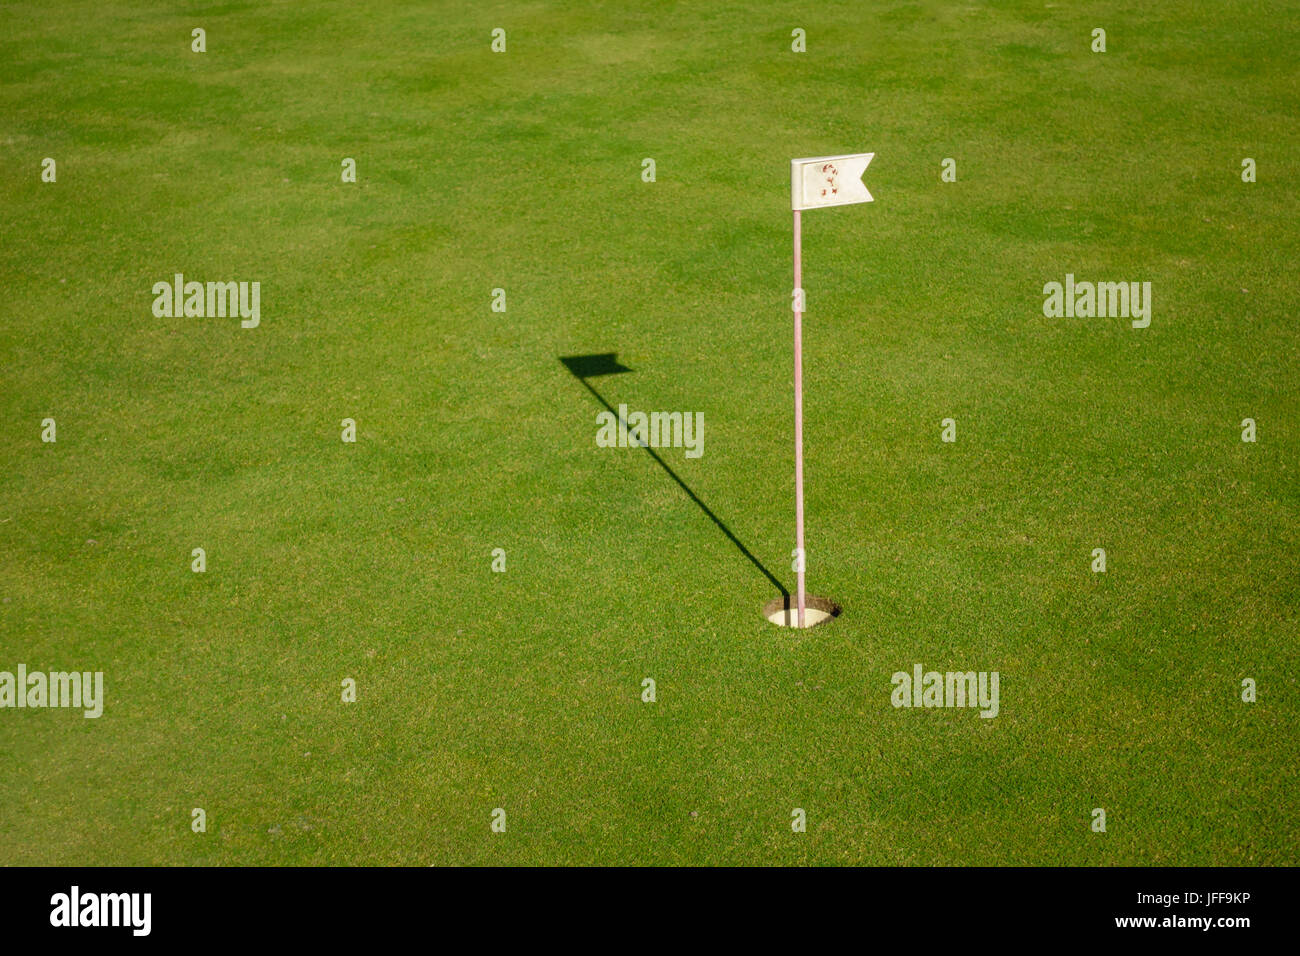 Glof flag mark in hole throwing shadow on the green course grass, golf playing concept Stock Photo